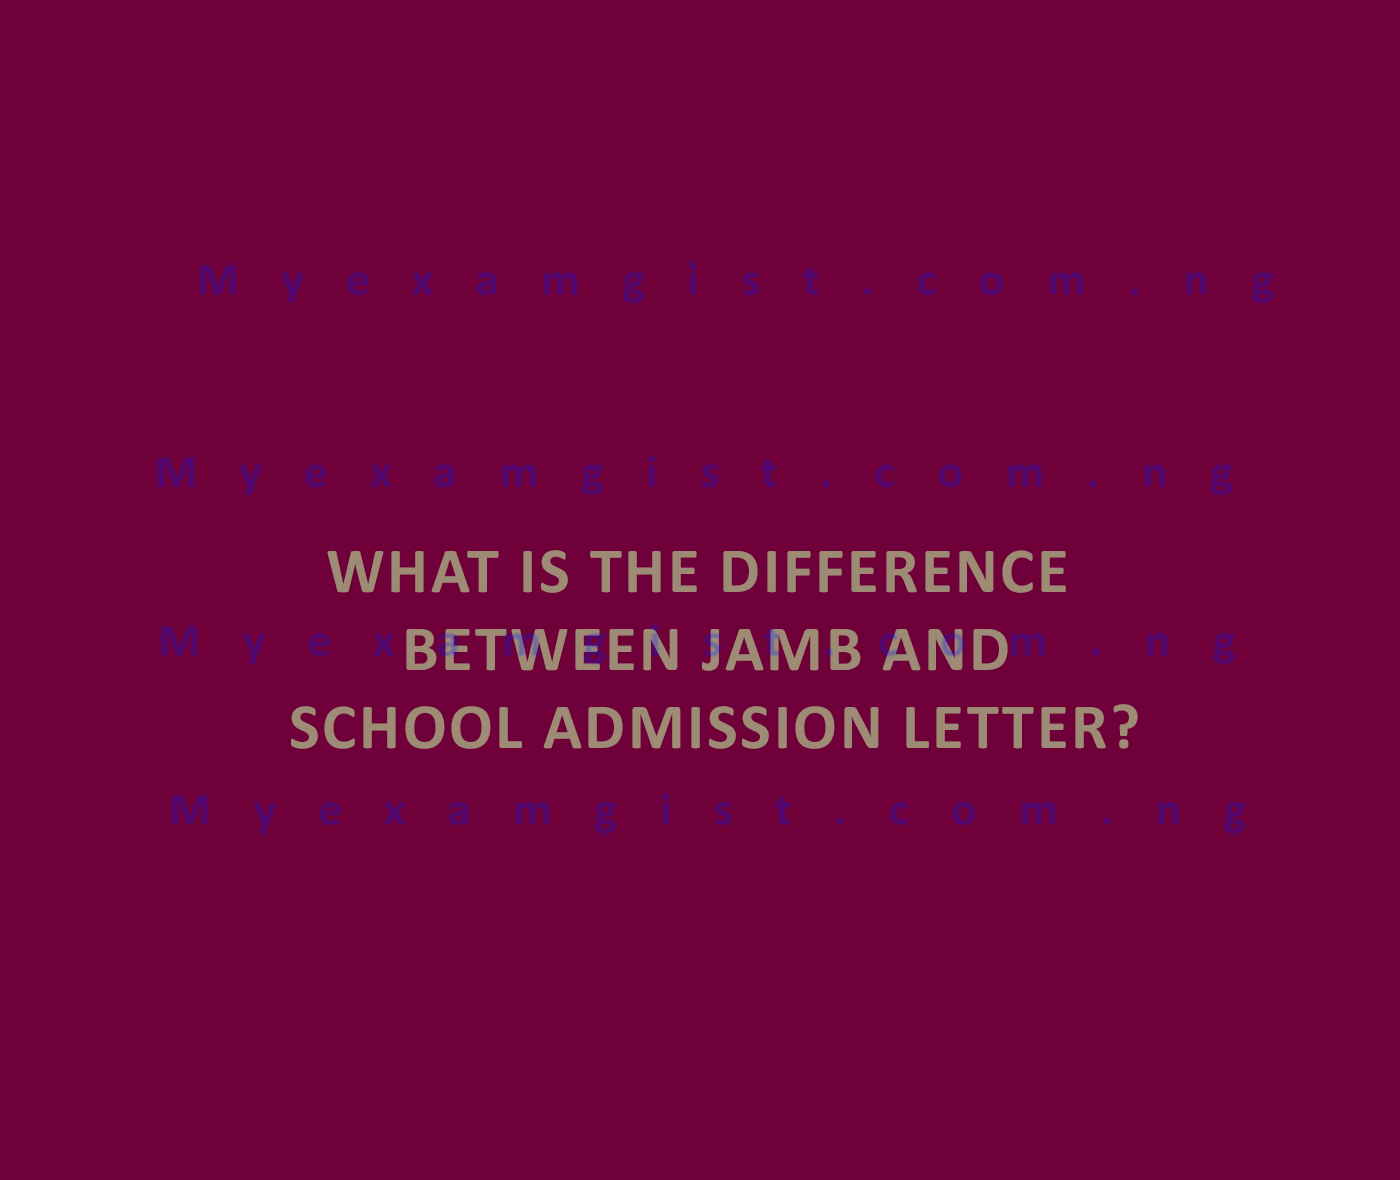 What is the difference between JAMB and school admission letter?